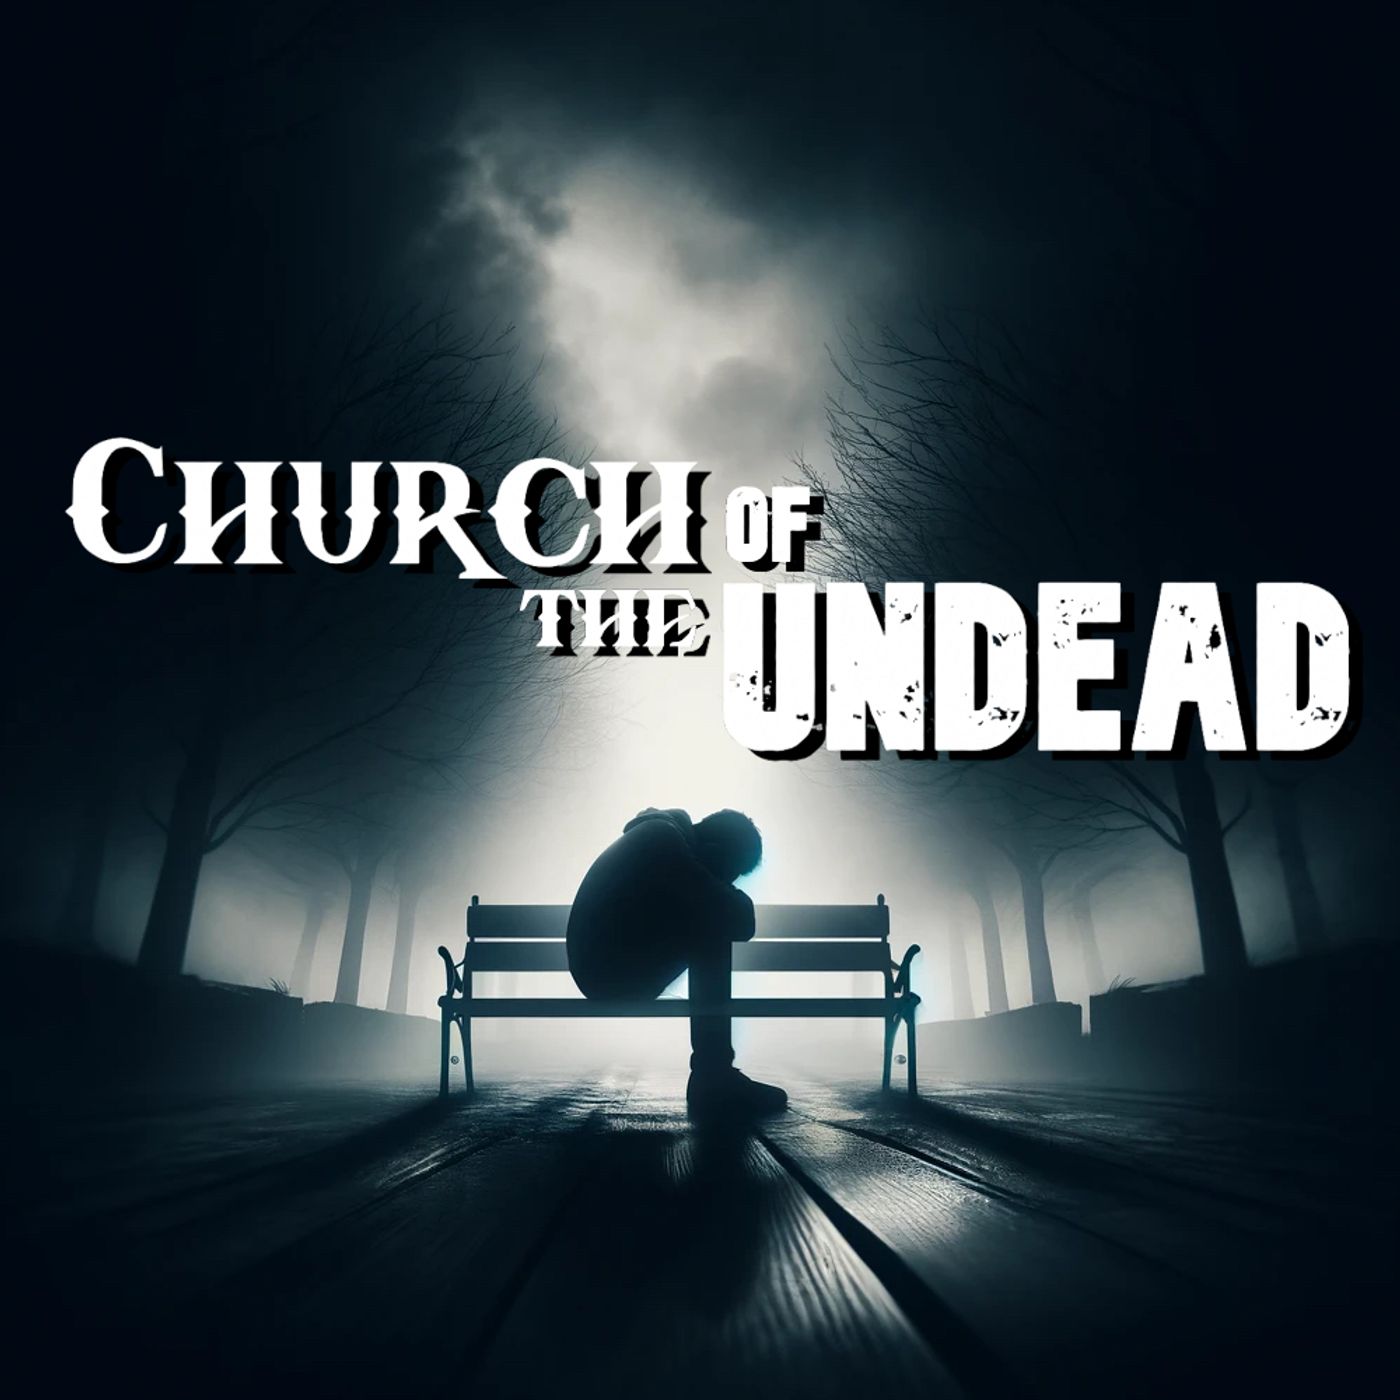 “MENTAL HEALTH AND CHRISTIAN CLICHES” #ChurchOfTheUndead